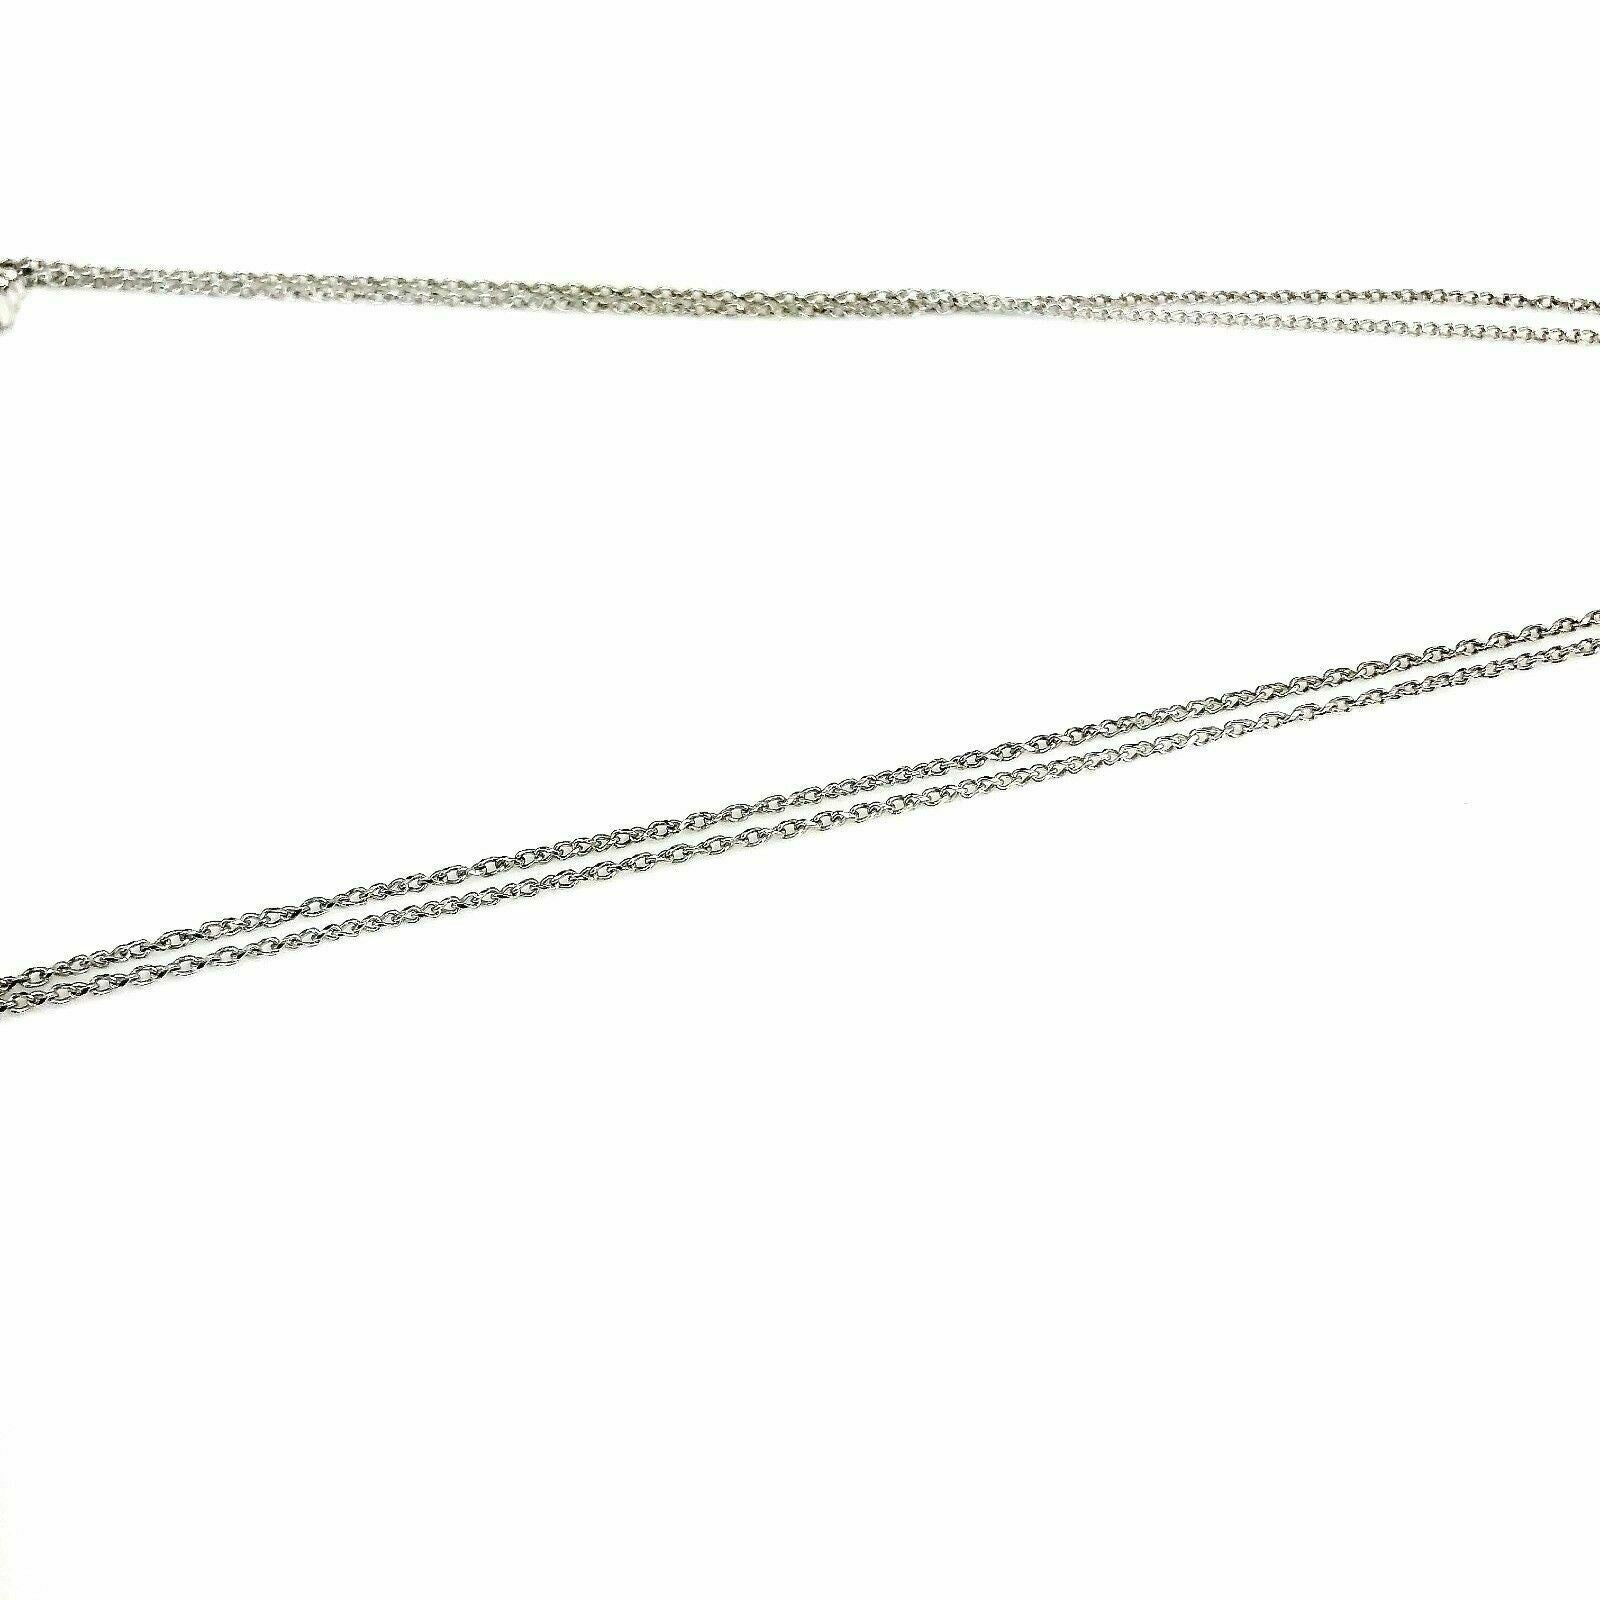 2.23 Carats Custom Made Rd and Baguette Diamond Necklace w Attatched Chain 14K